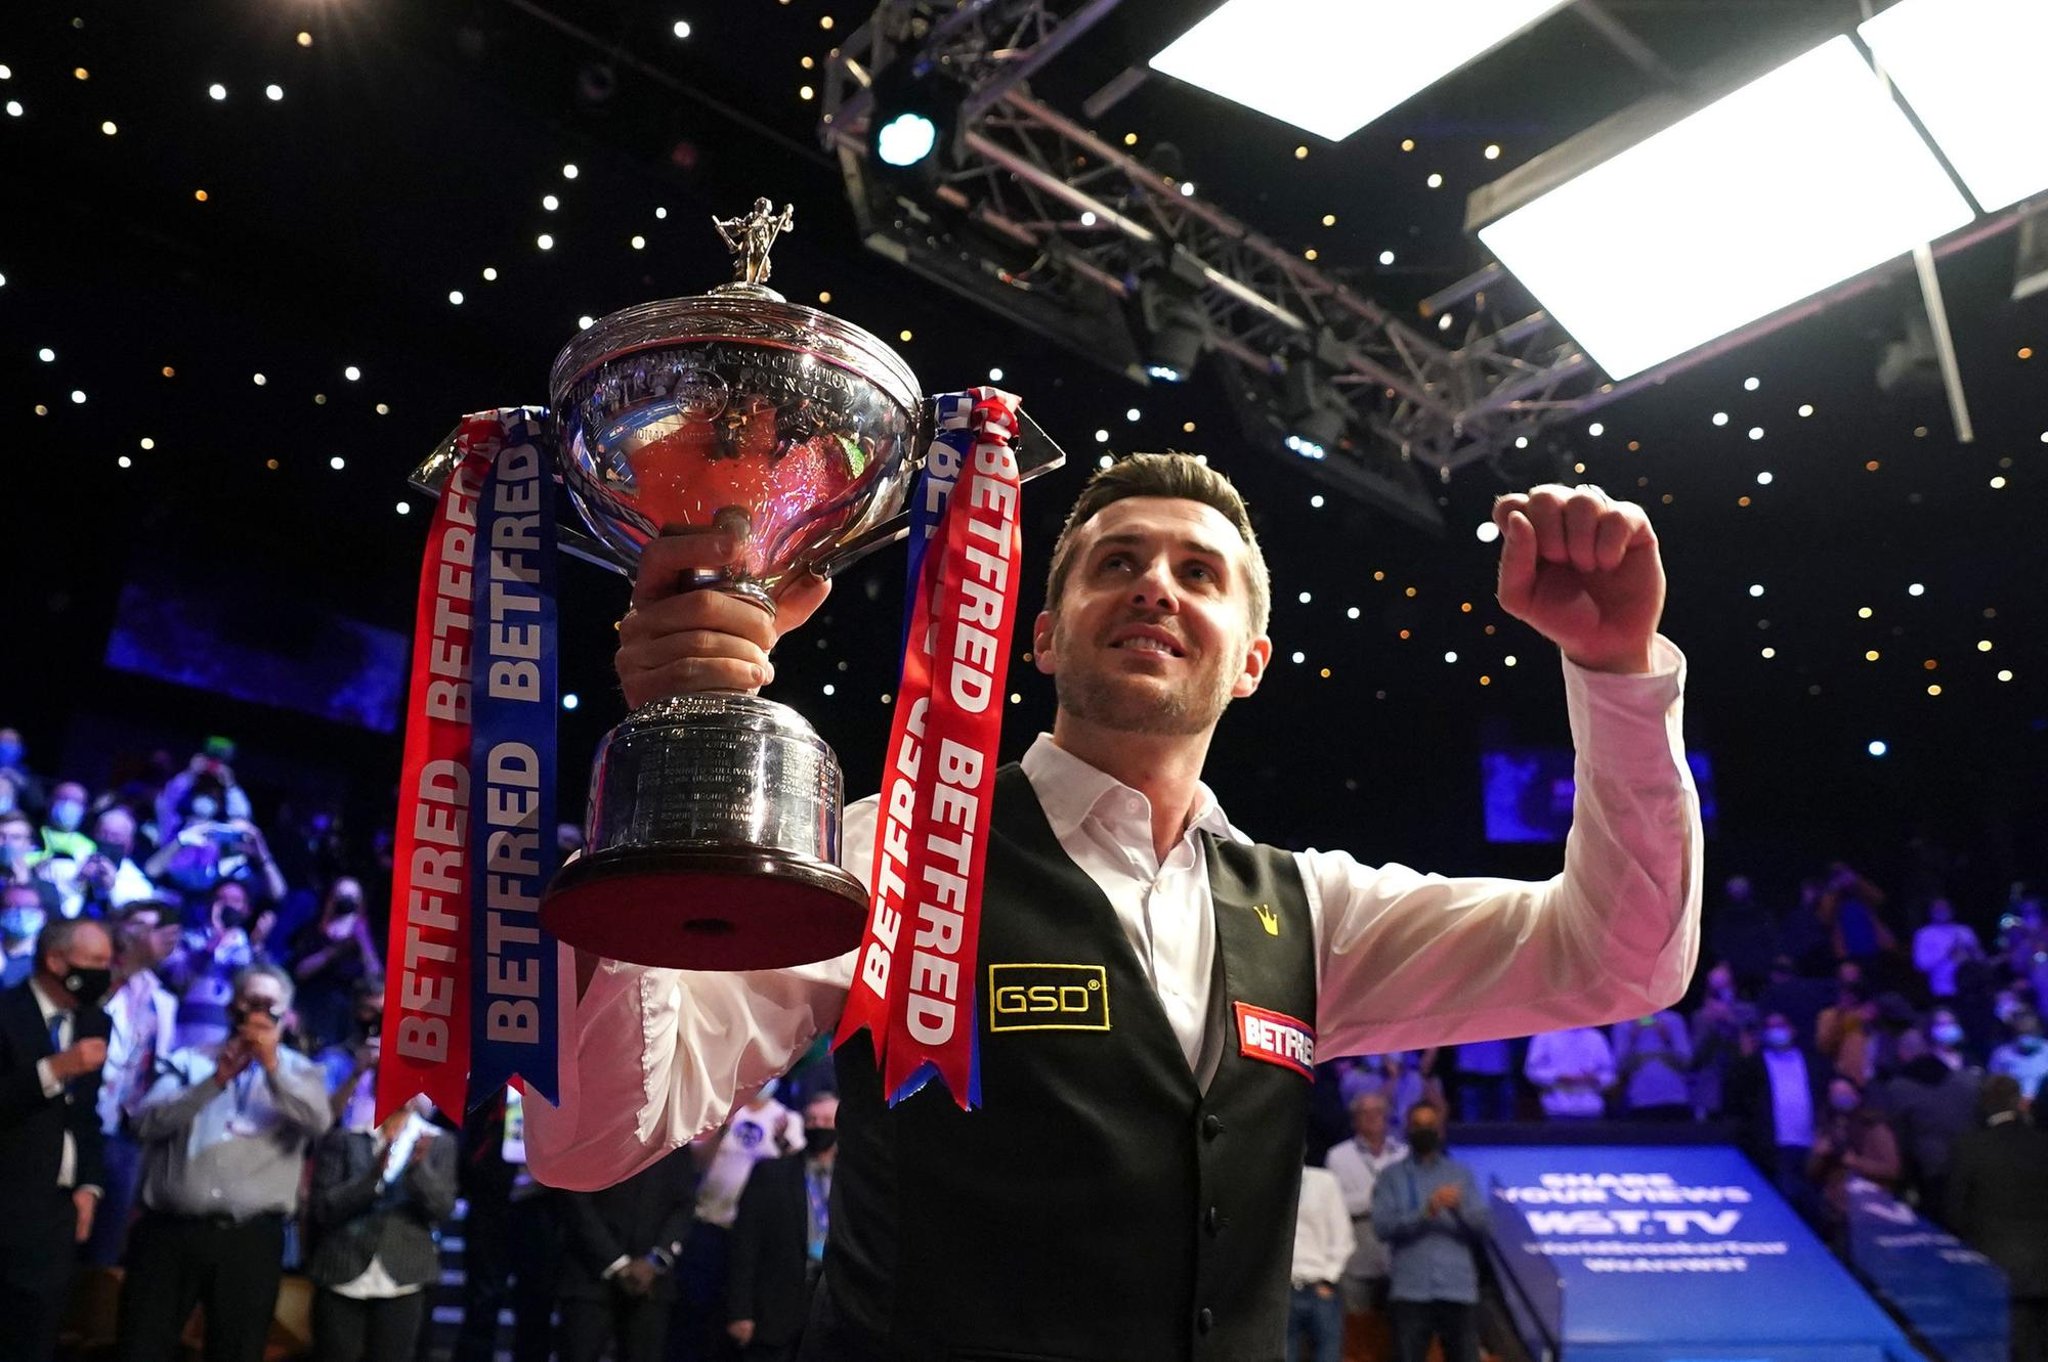 Mark Selby lays claim to John Higgins’ status as snooker’s greatest all-rounder